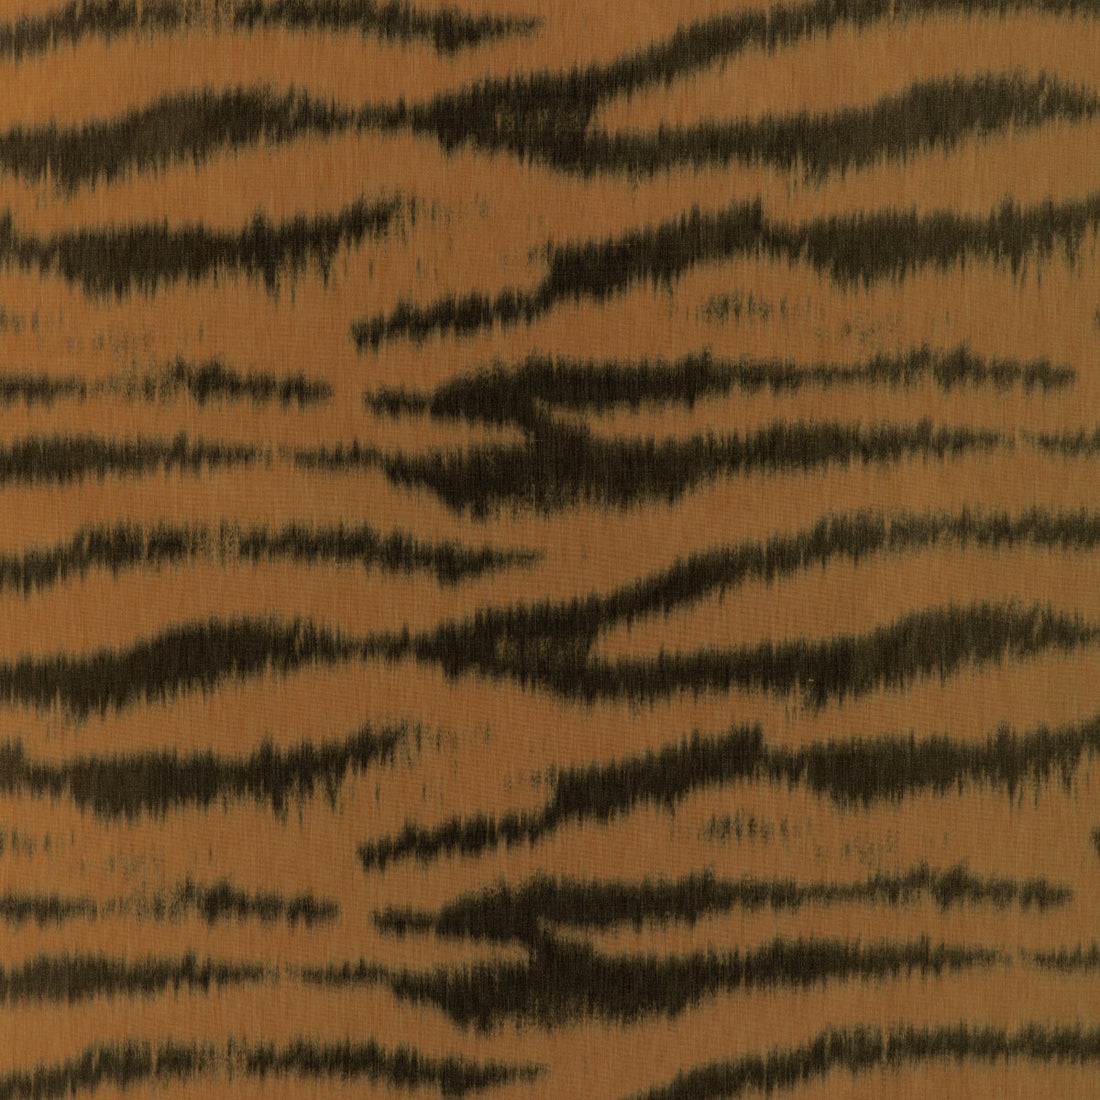 Tigre Warp Print fabric in gold color - pattern 8023137.4.0 - by Brunschwig &amp; Fils in the Celeste collection